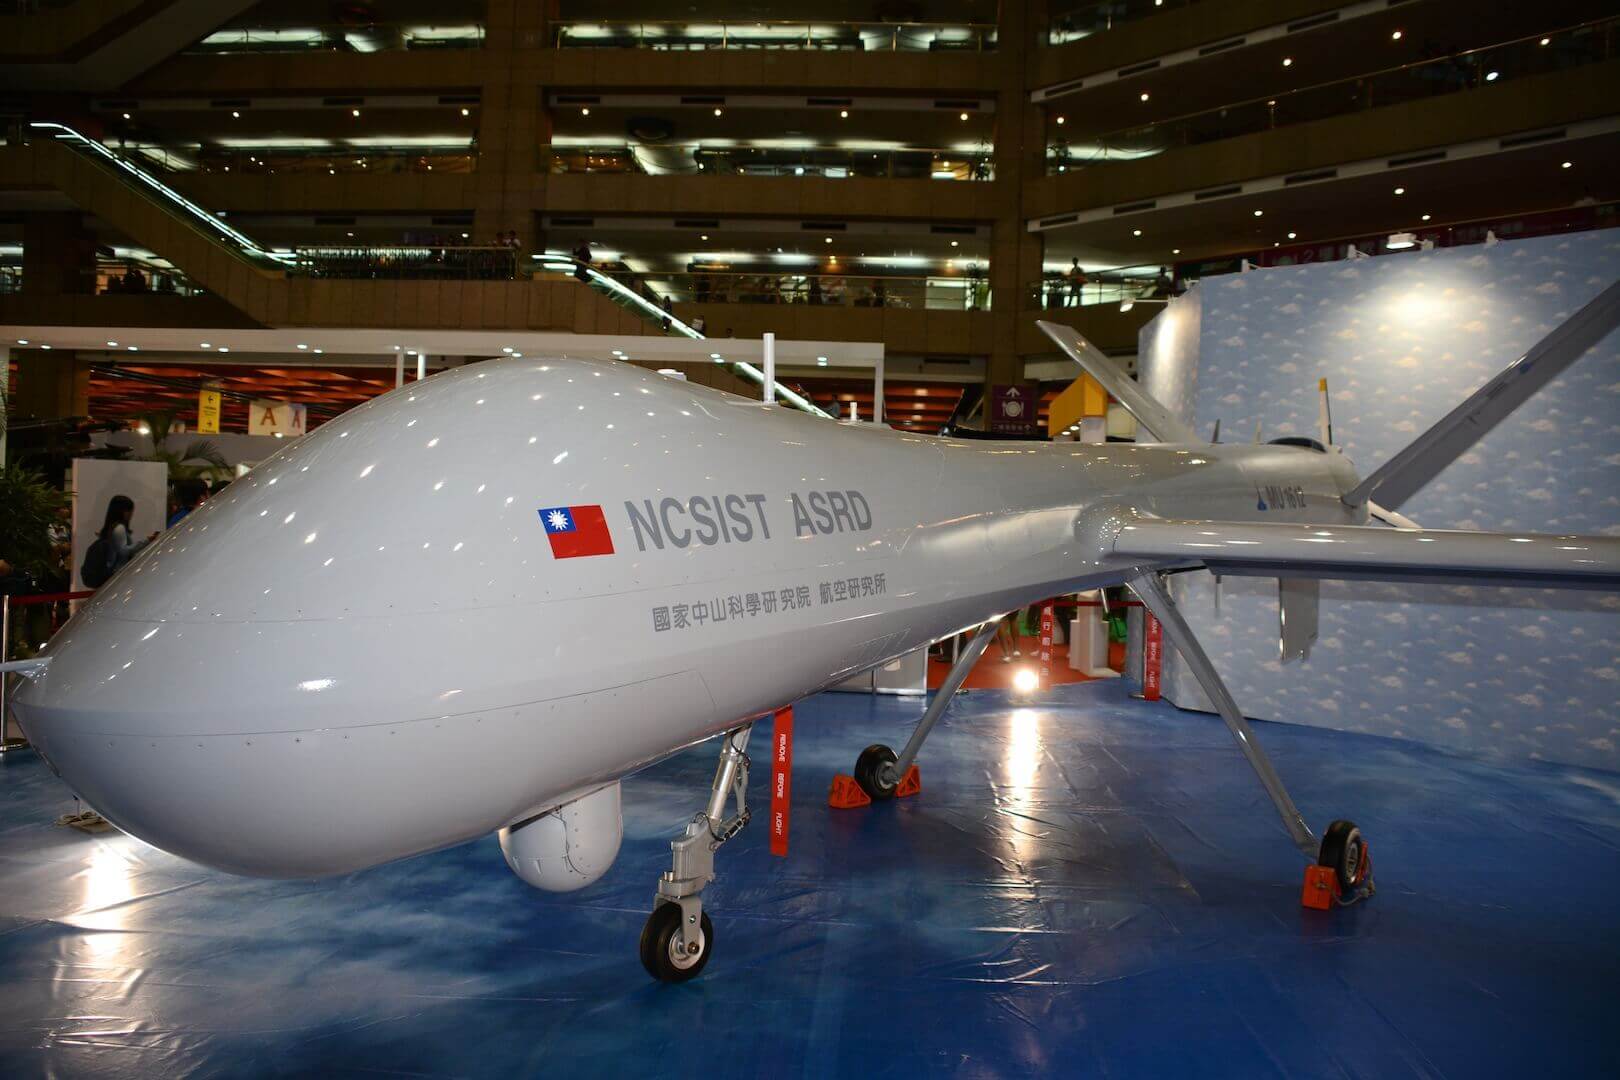 Taiwan to Accelerate Drone Development Based on Lessons from Ukraine War